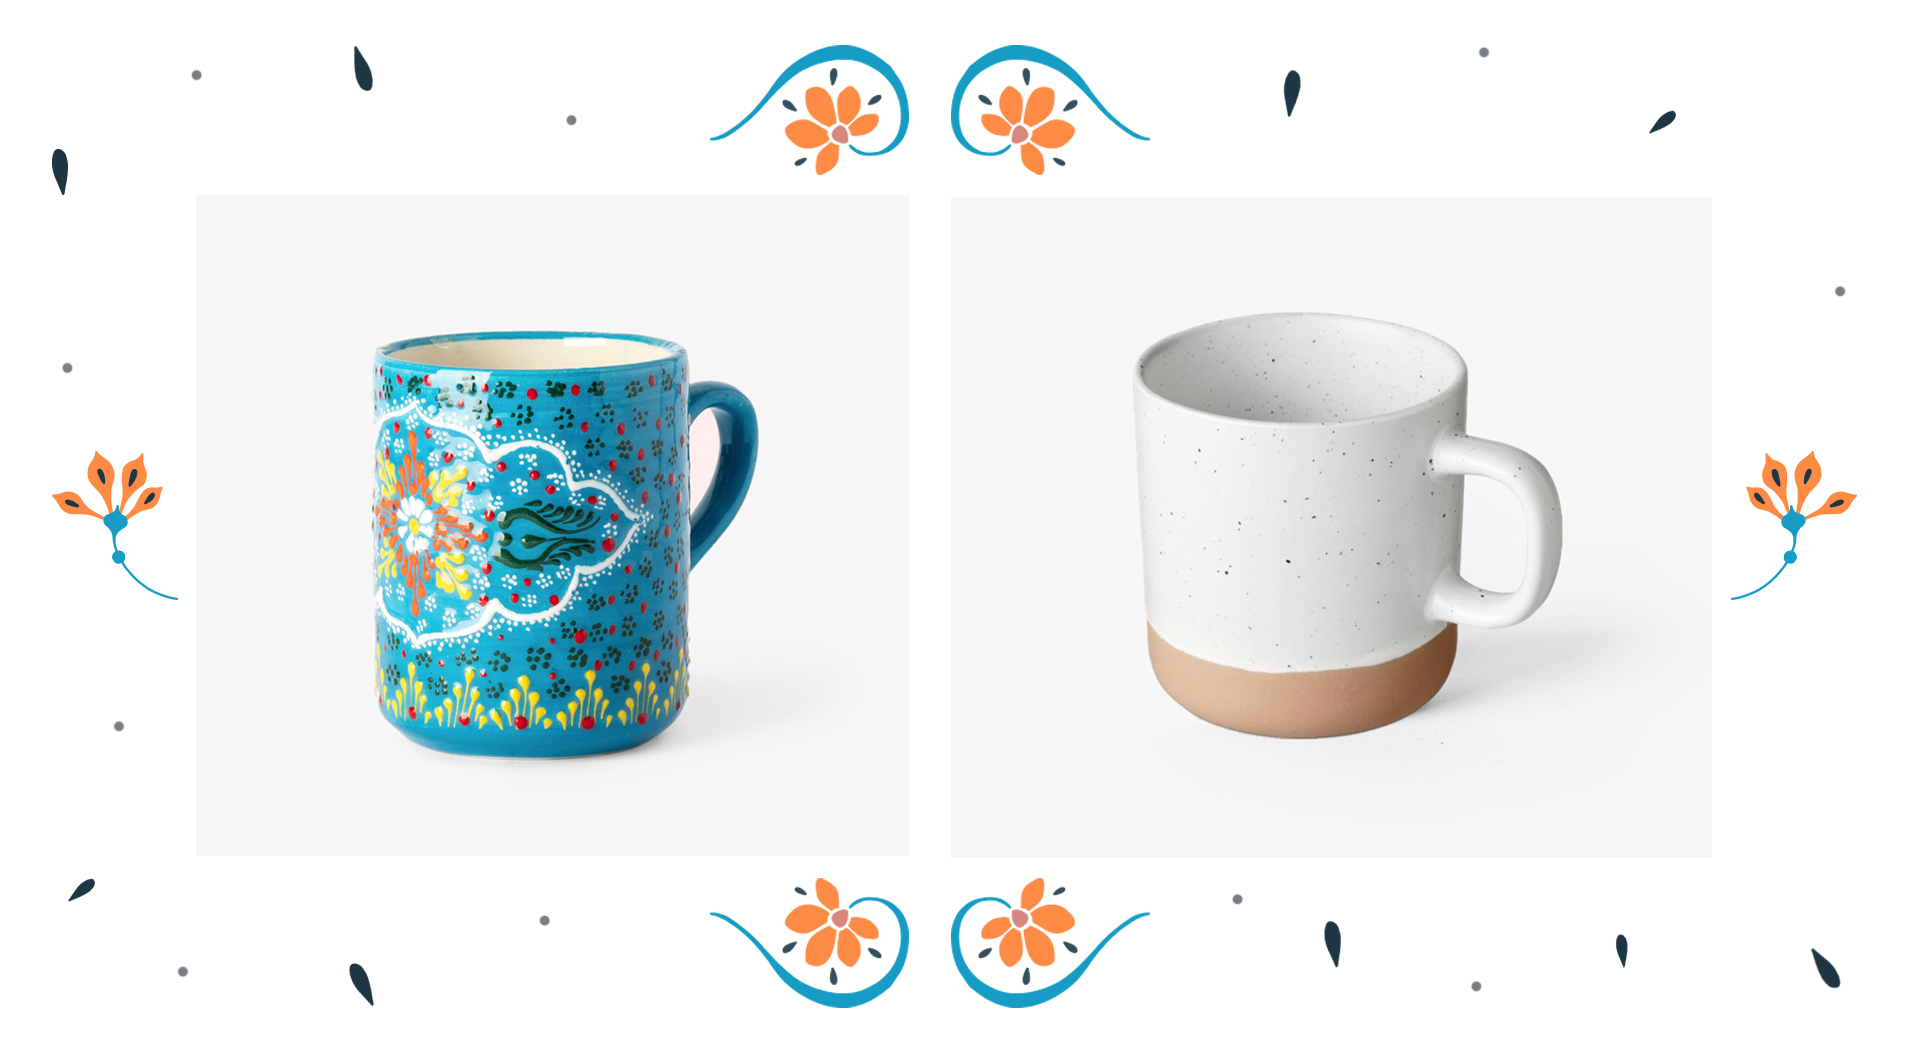 Blue Hand Painted Summer Ceramic Mug and White Ceramic Mug with Unglazed Bottom with floral decoration in oranges and blues